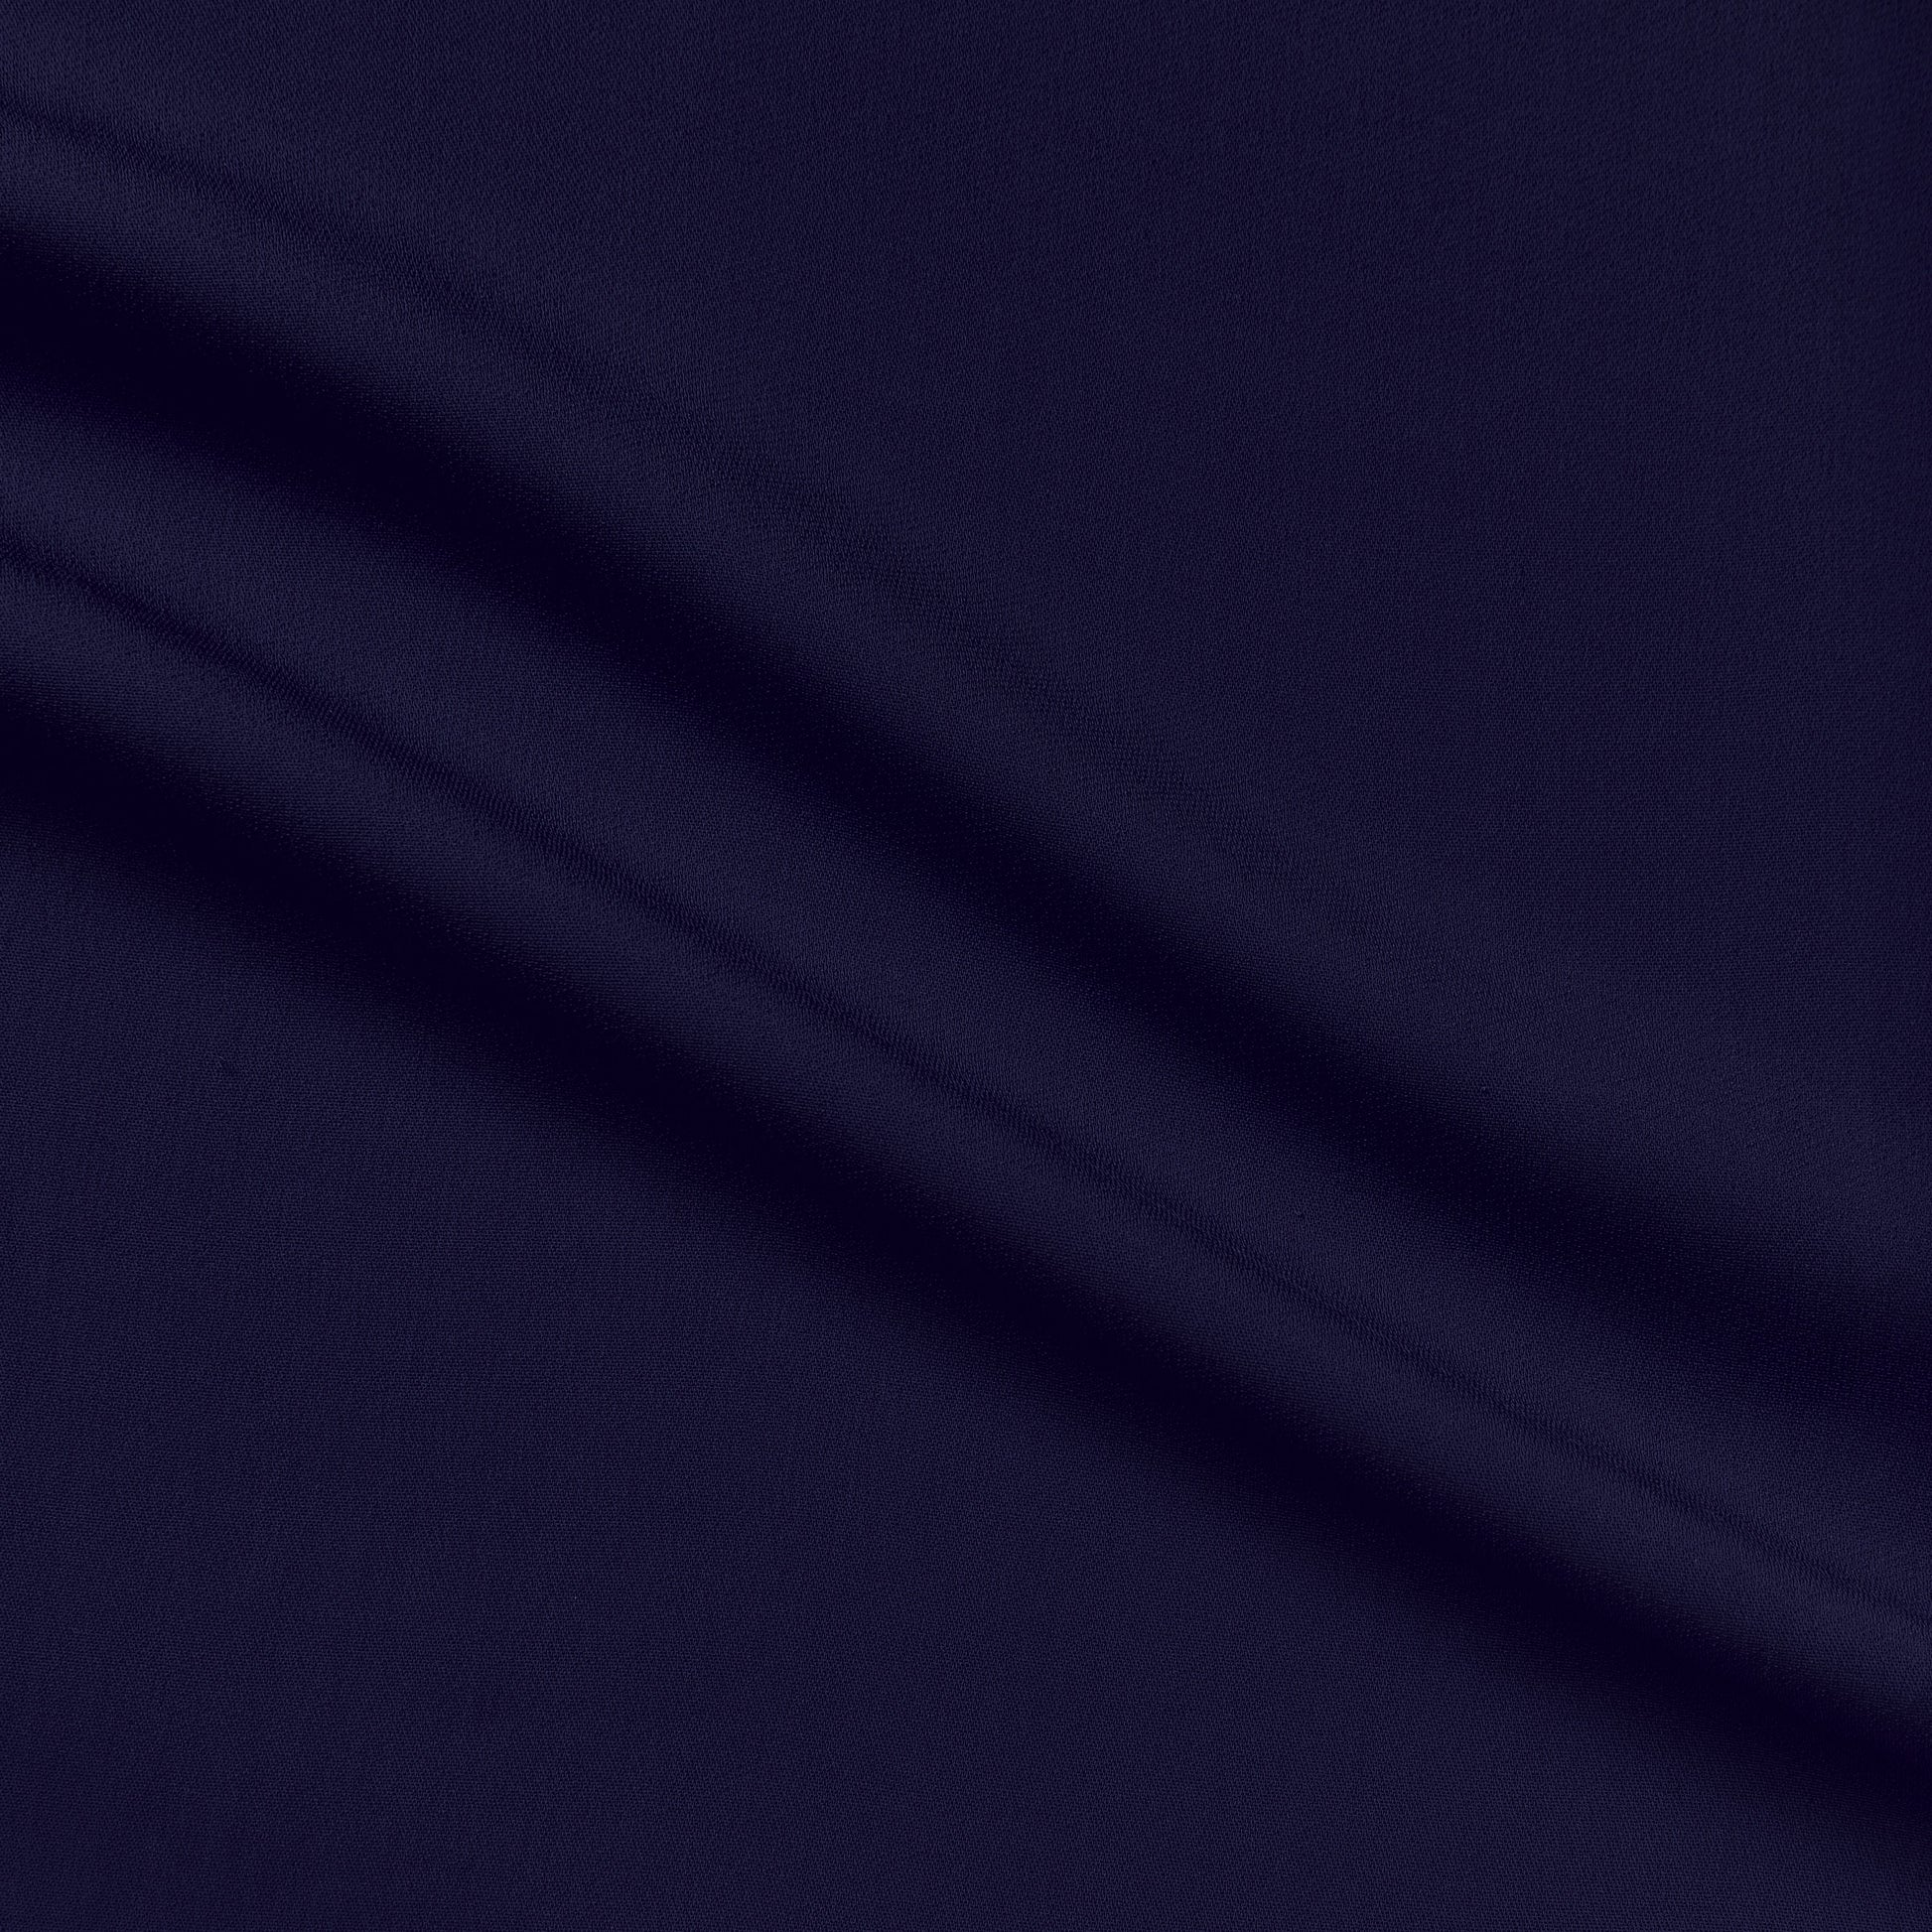 imagine presenting the navy color variant of a stretch mid weight viscose and lycra with a natural silk like sheen and good drape